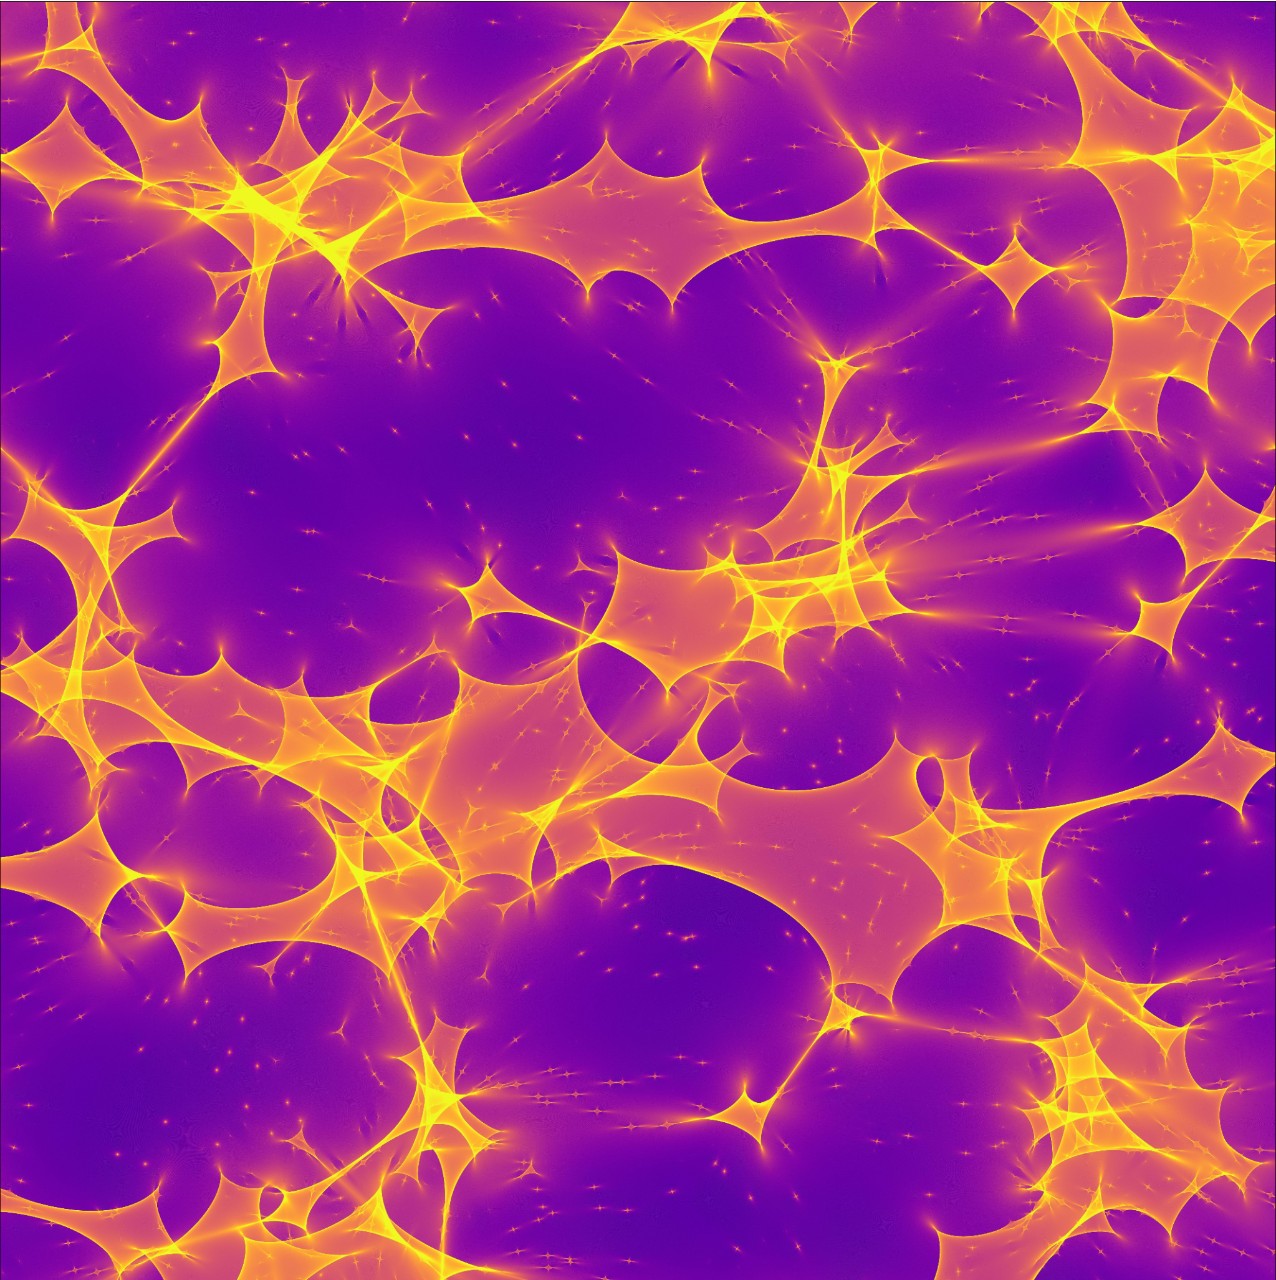 A brilliant purple background upon which are the beautiful arcs of various golden fractles.